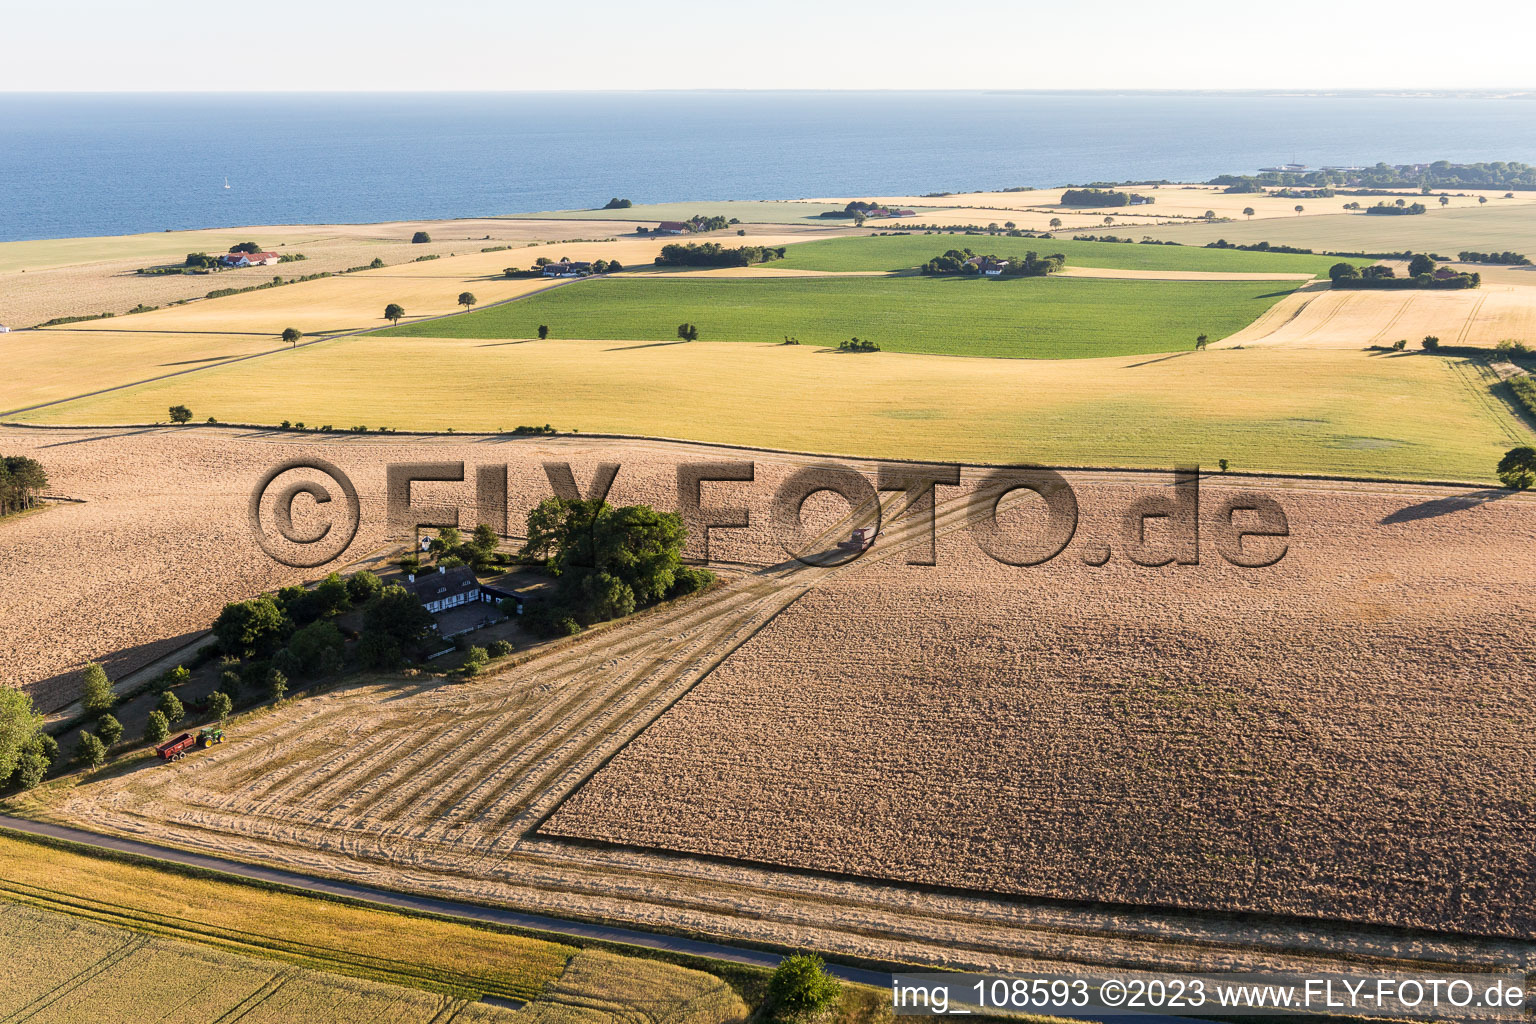 Bird's eye view of Borre in the state Zealand, Denmark